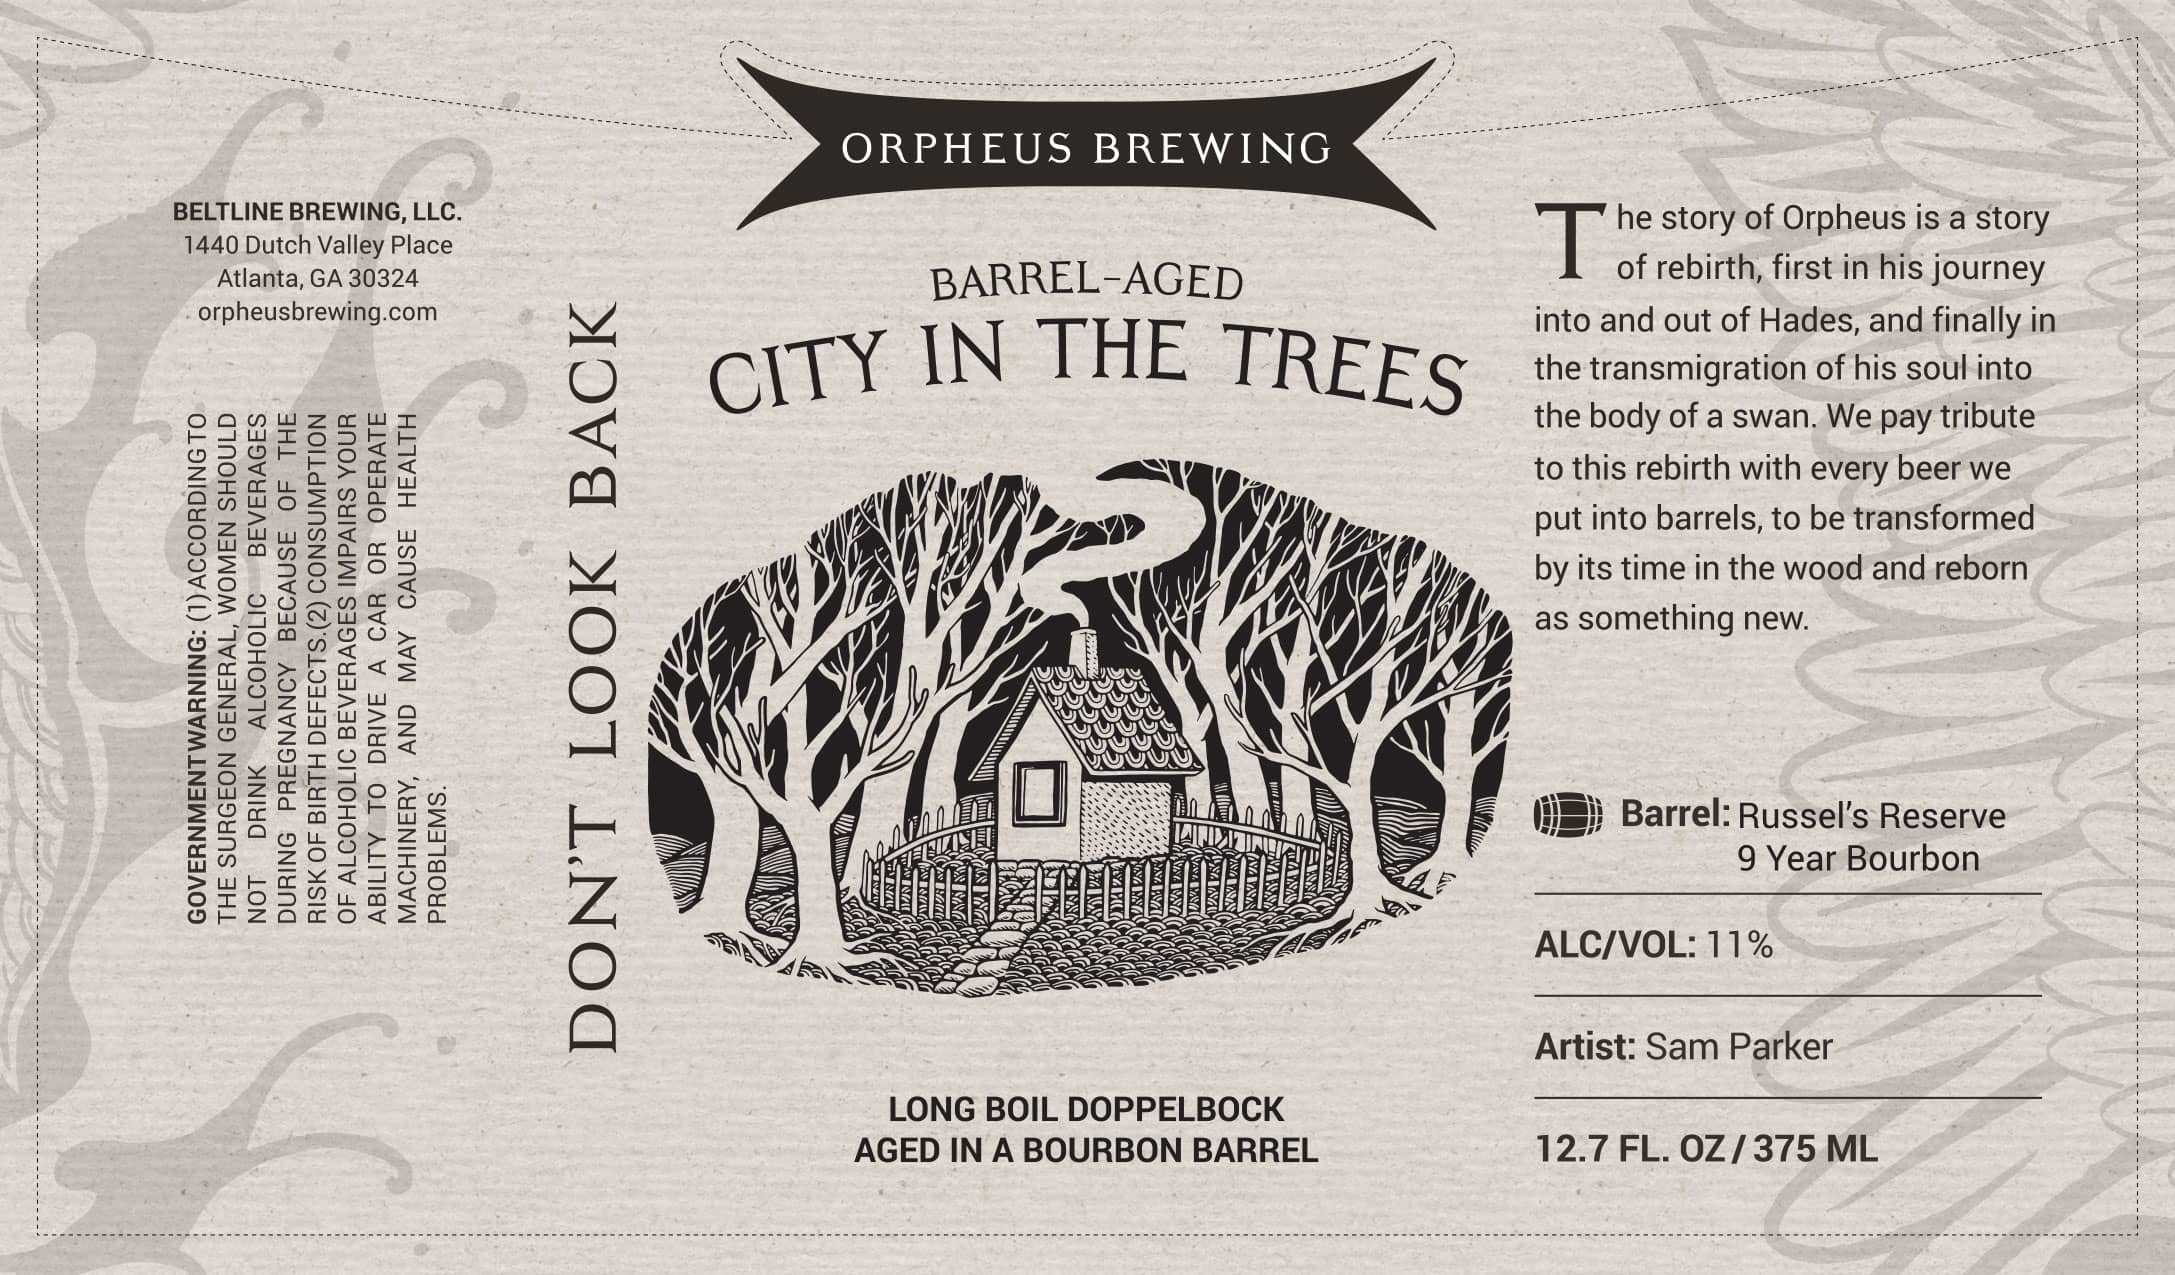 Orpheus - Barrel-Aged City in the Trees